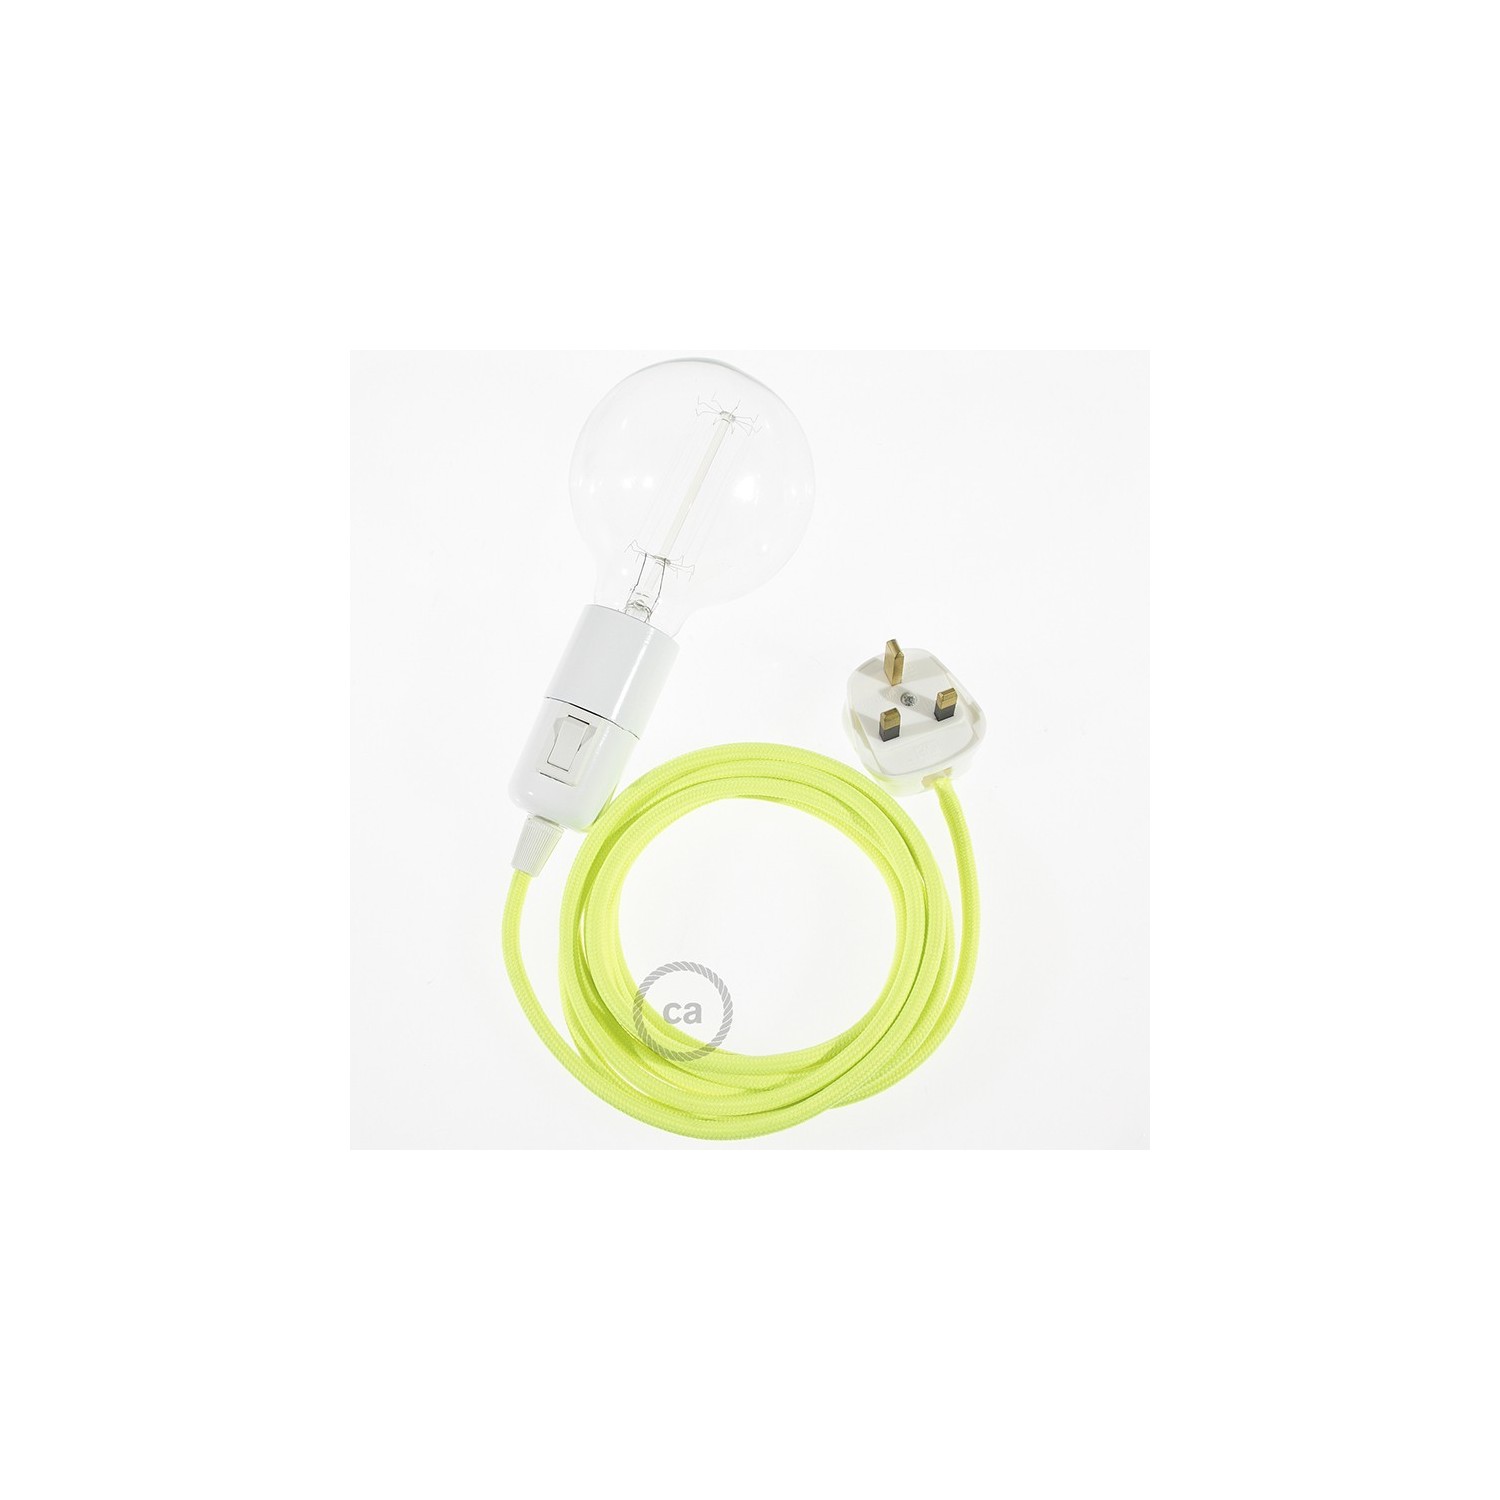 Create your RF10 Yellow Fluo Snake and bring the light wherever you want.